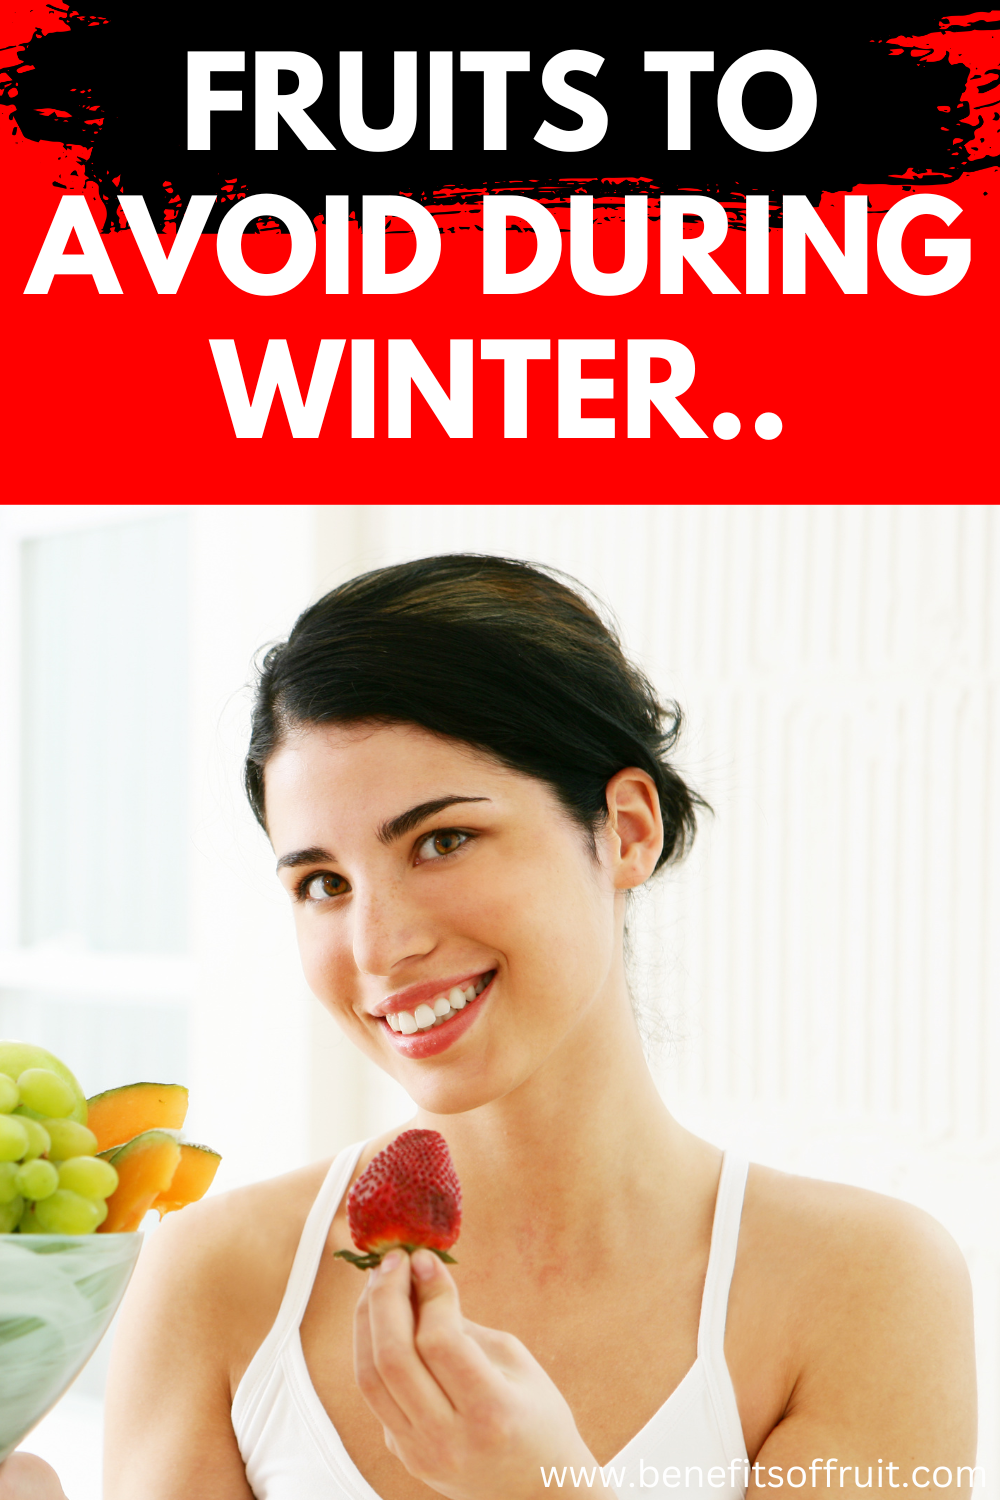 Fruits to Avoid During Winter